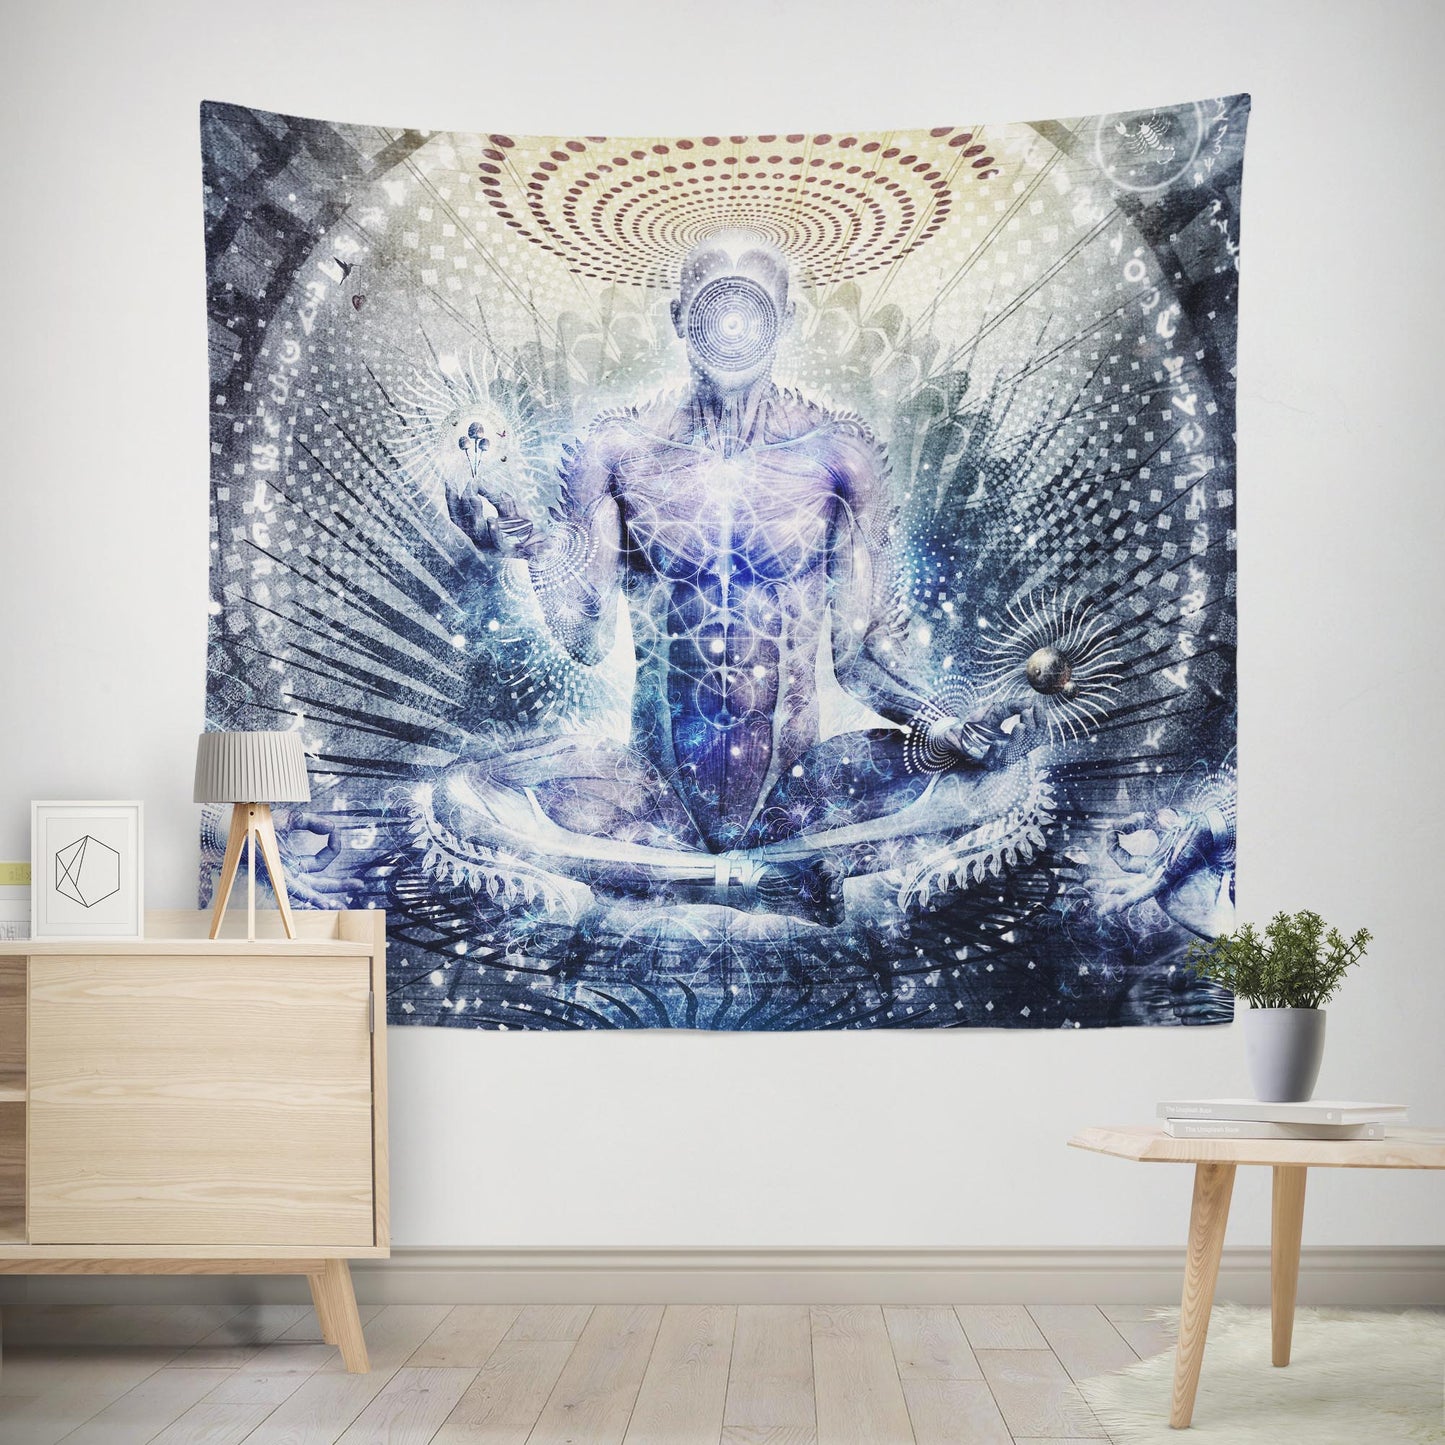 Awake Could Be So Beautiful Tapestry